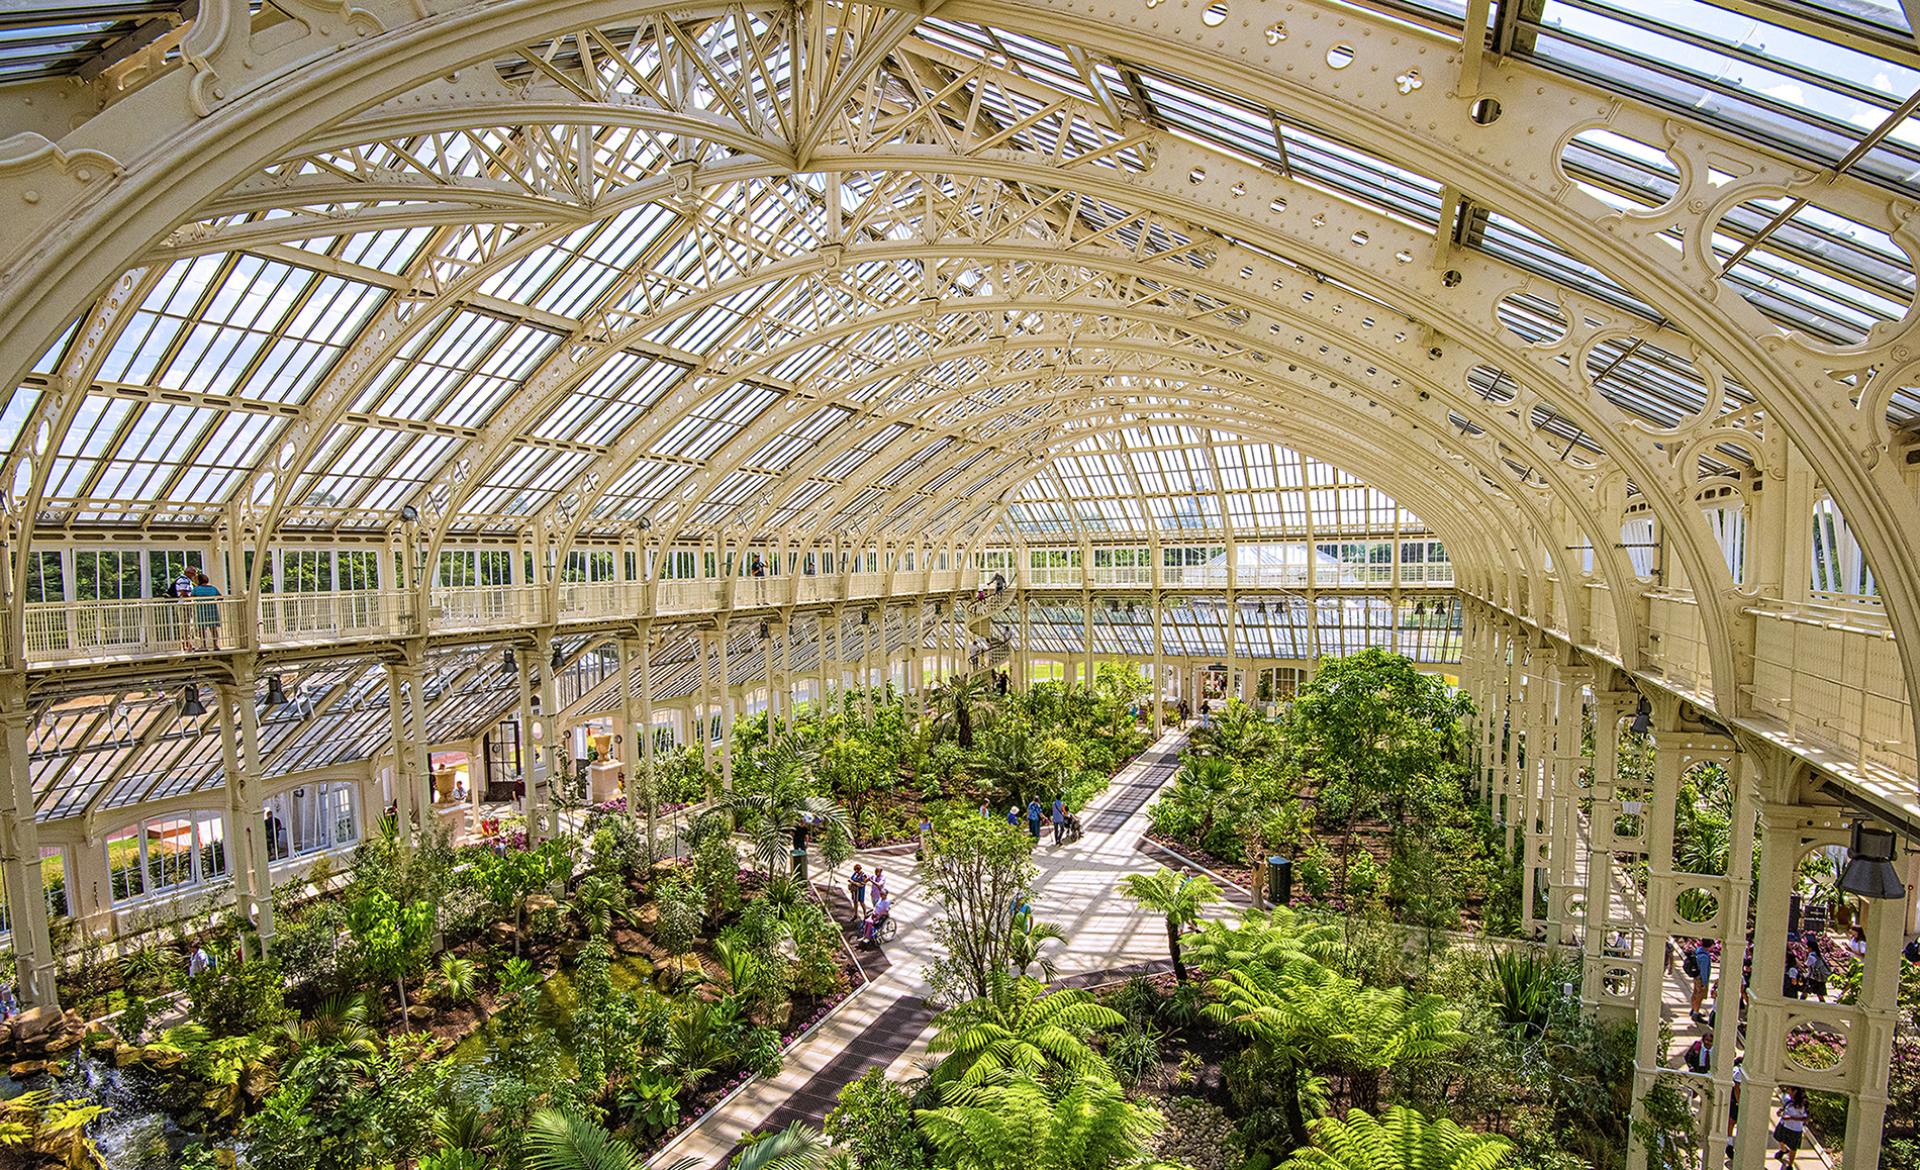 London Photography Awards Winner - Inside the Temperate House